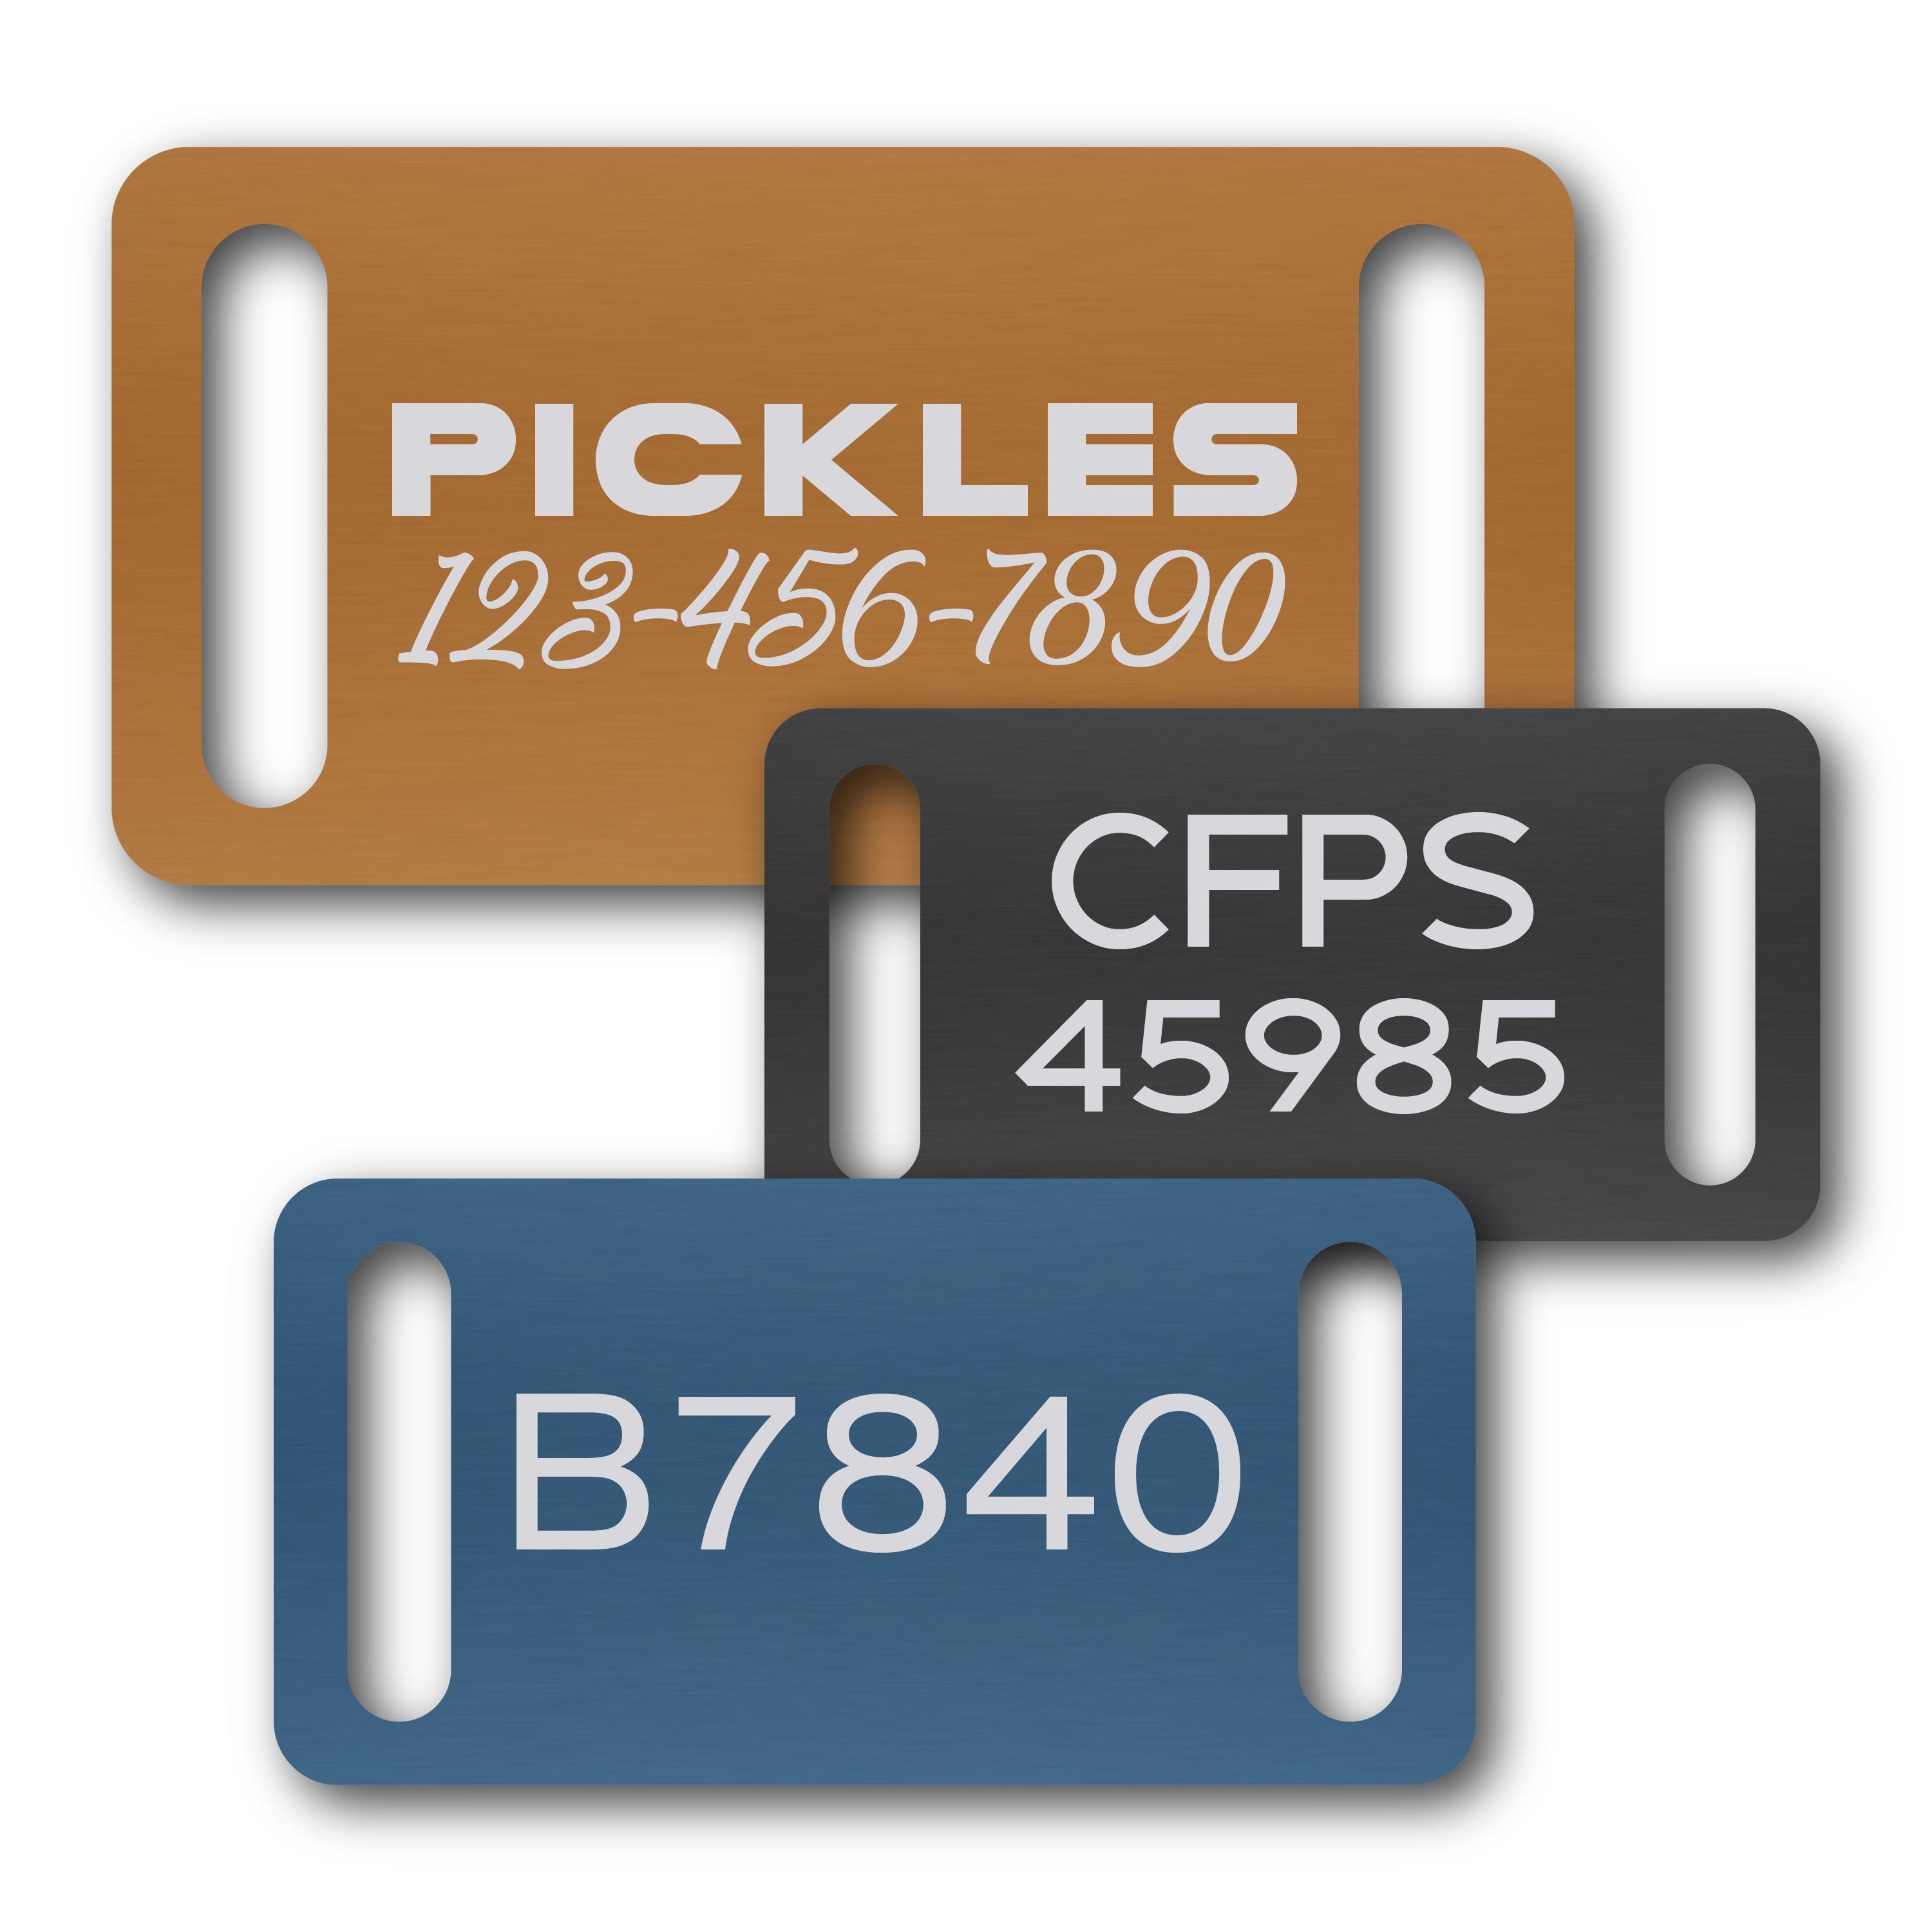 Anodized Aluminum Rectangle Slide-On Tags, 7/8" x 1-3/4" with 5/32" x 3/4" Slot, Laser Engraved Metal Tags Craftworks NW 